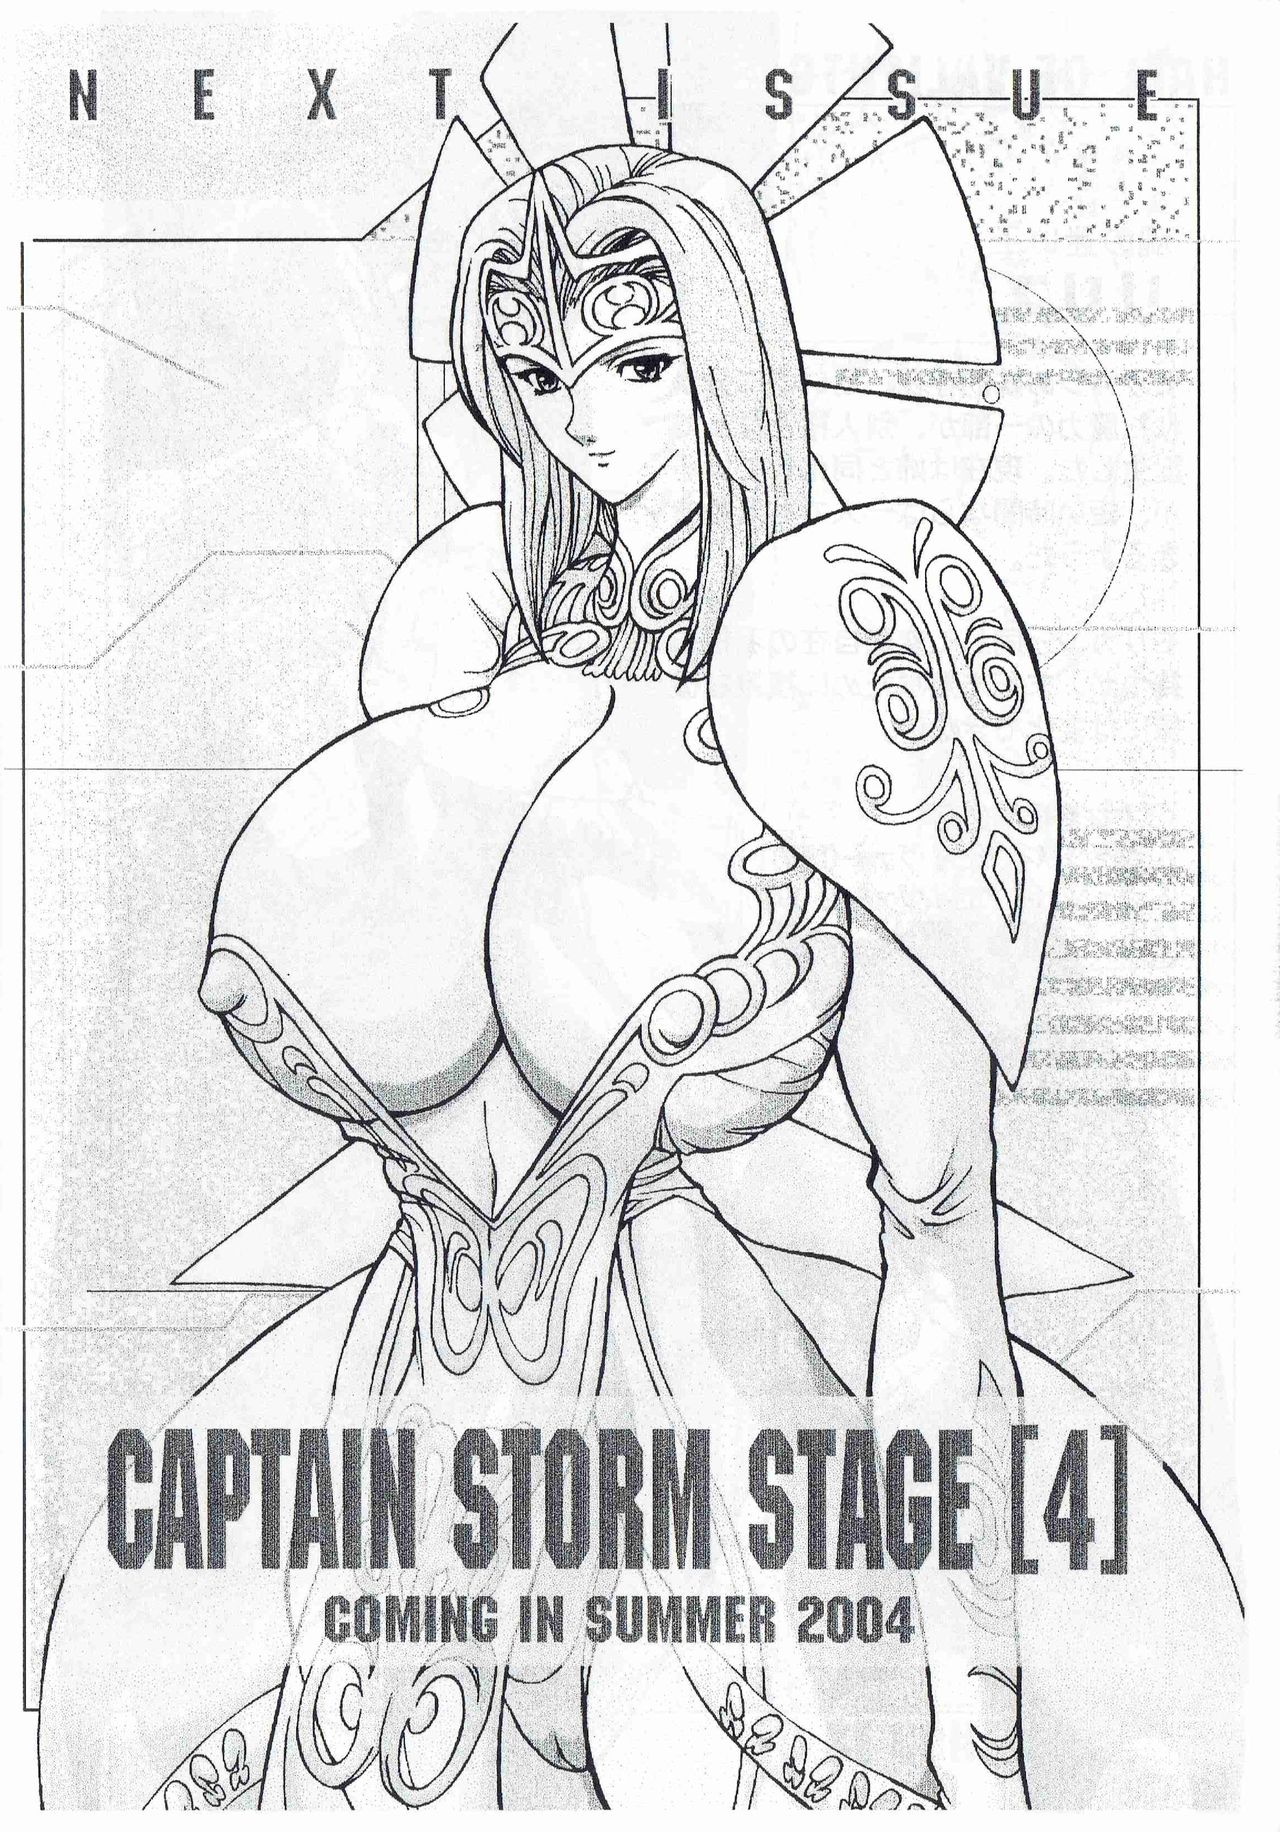 [Kyuukisidan(Takesin)] CAPTAIN STORM STAGE 3 page 22 full